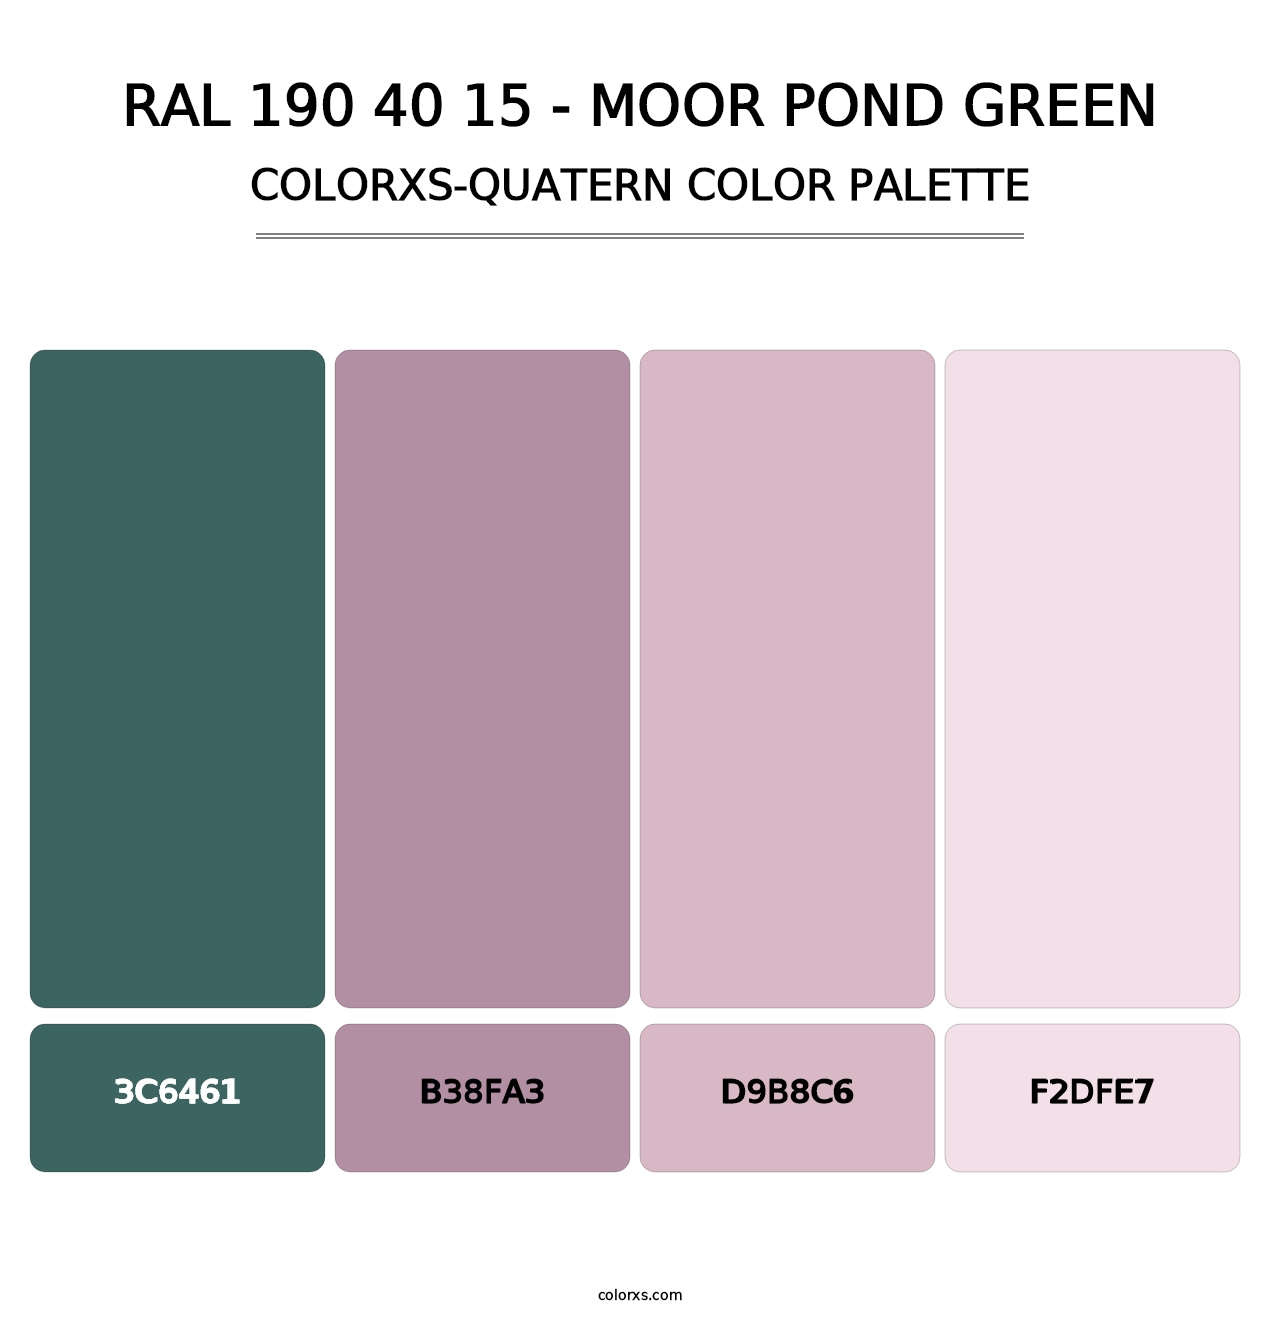 RAL 190 40 15 - Moor Pond Green - Colorxs Quatern Palette